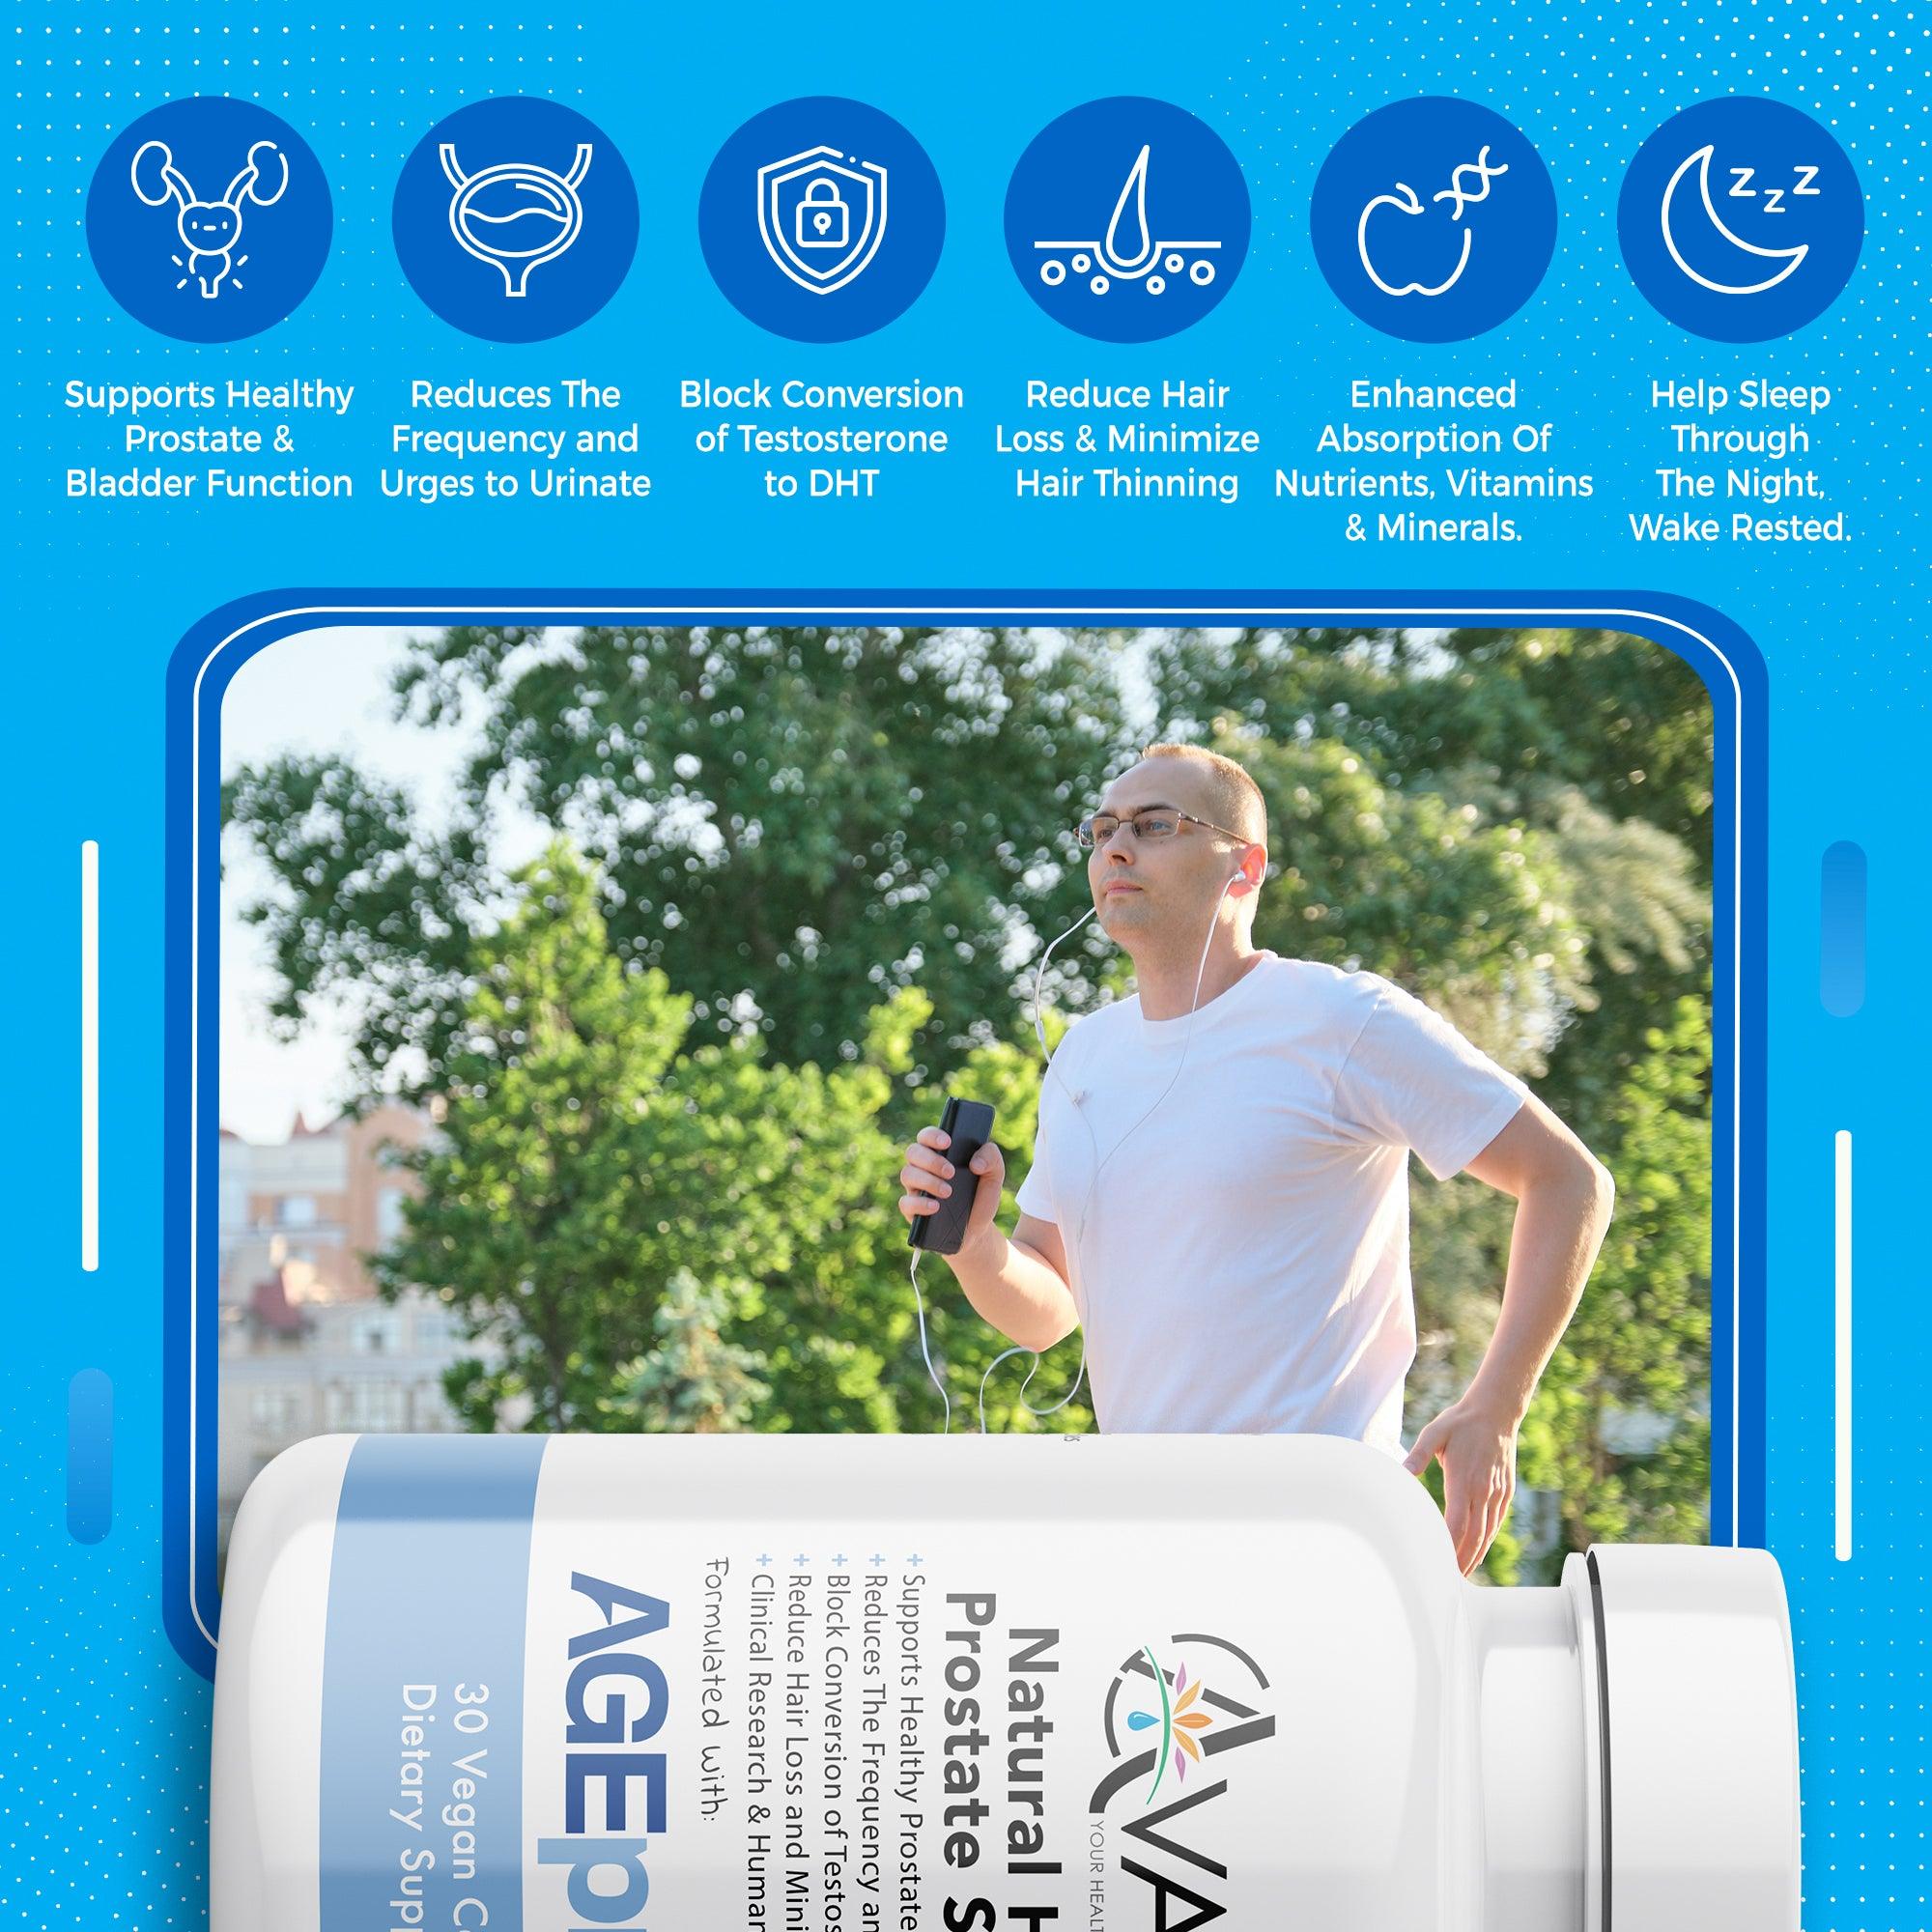 AGEprost® Natural Herbal Prostate Support - Avani Wellness